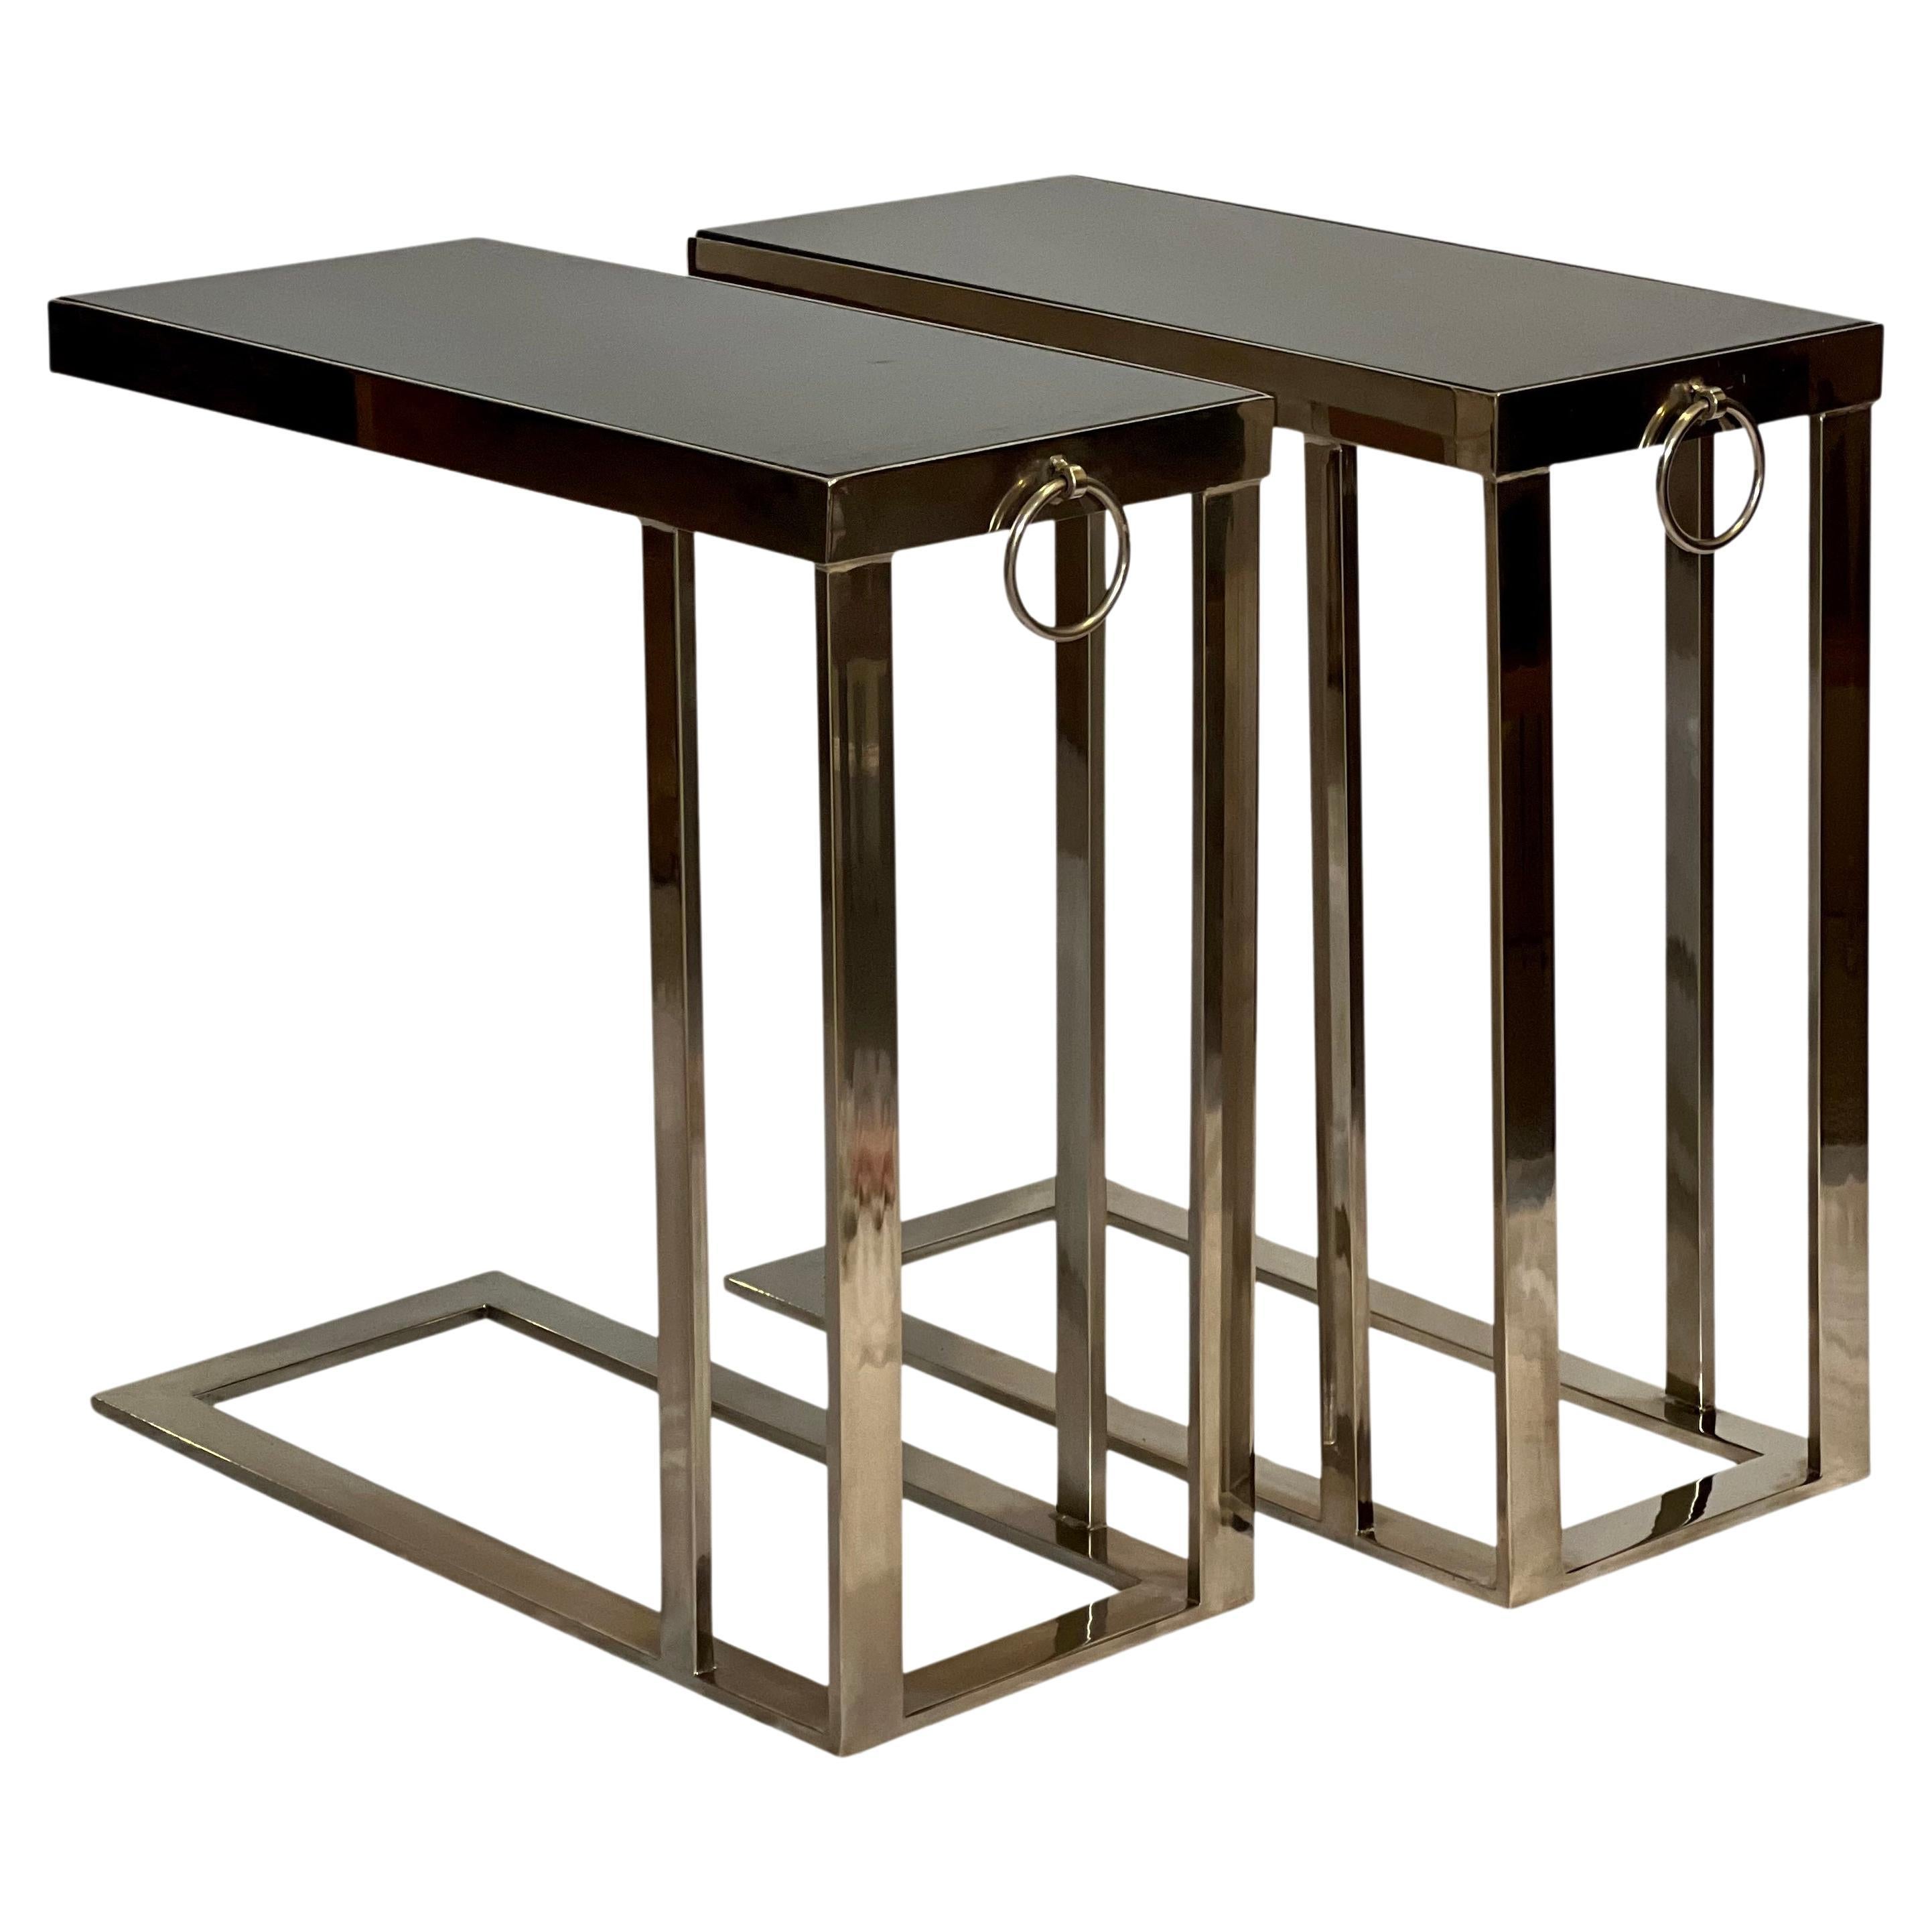 Sleek flat bar chromed steel cantilever side tables with black marble tops and bullnose ring detail. The pair offers a slim silhouette with a polished and sturdy flat bar frame. 

Practical and beautiful, the cantilever style allows you to slide the